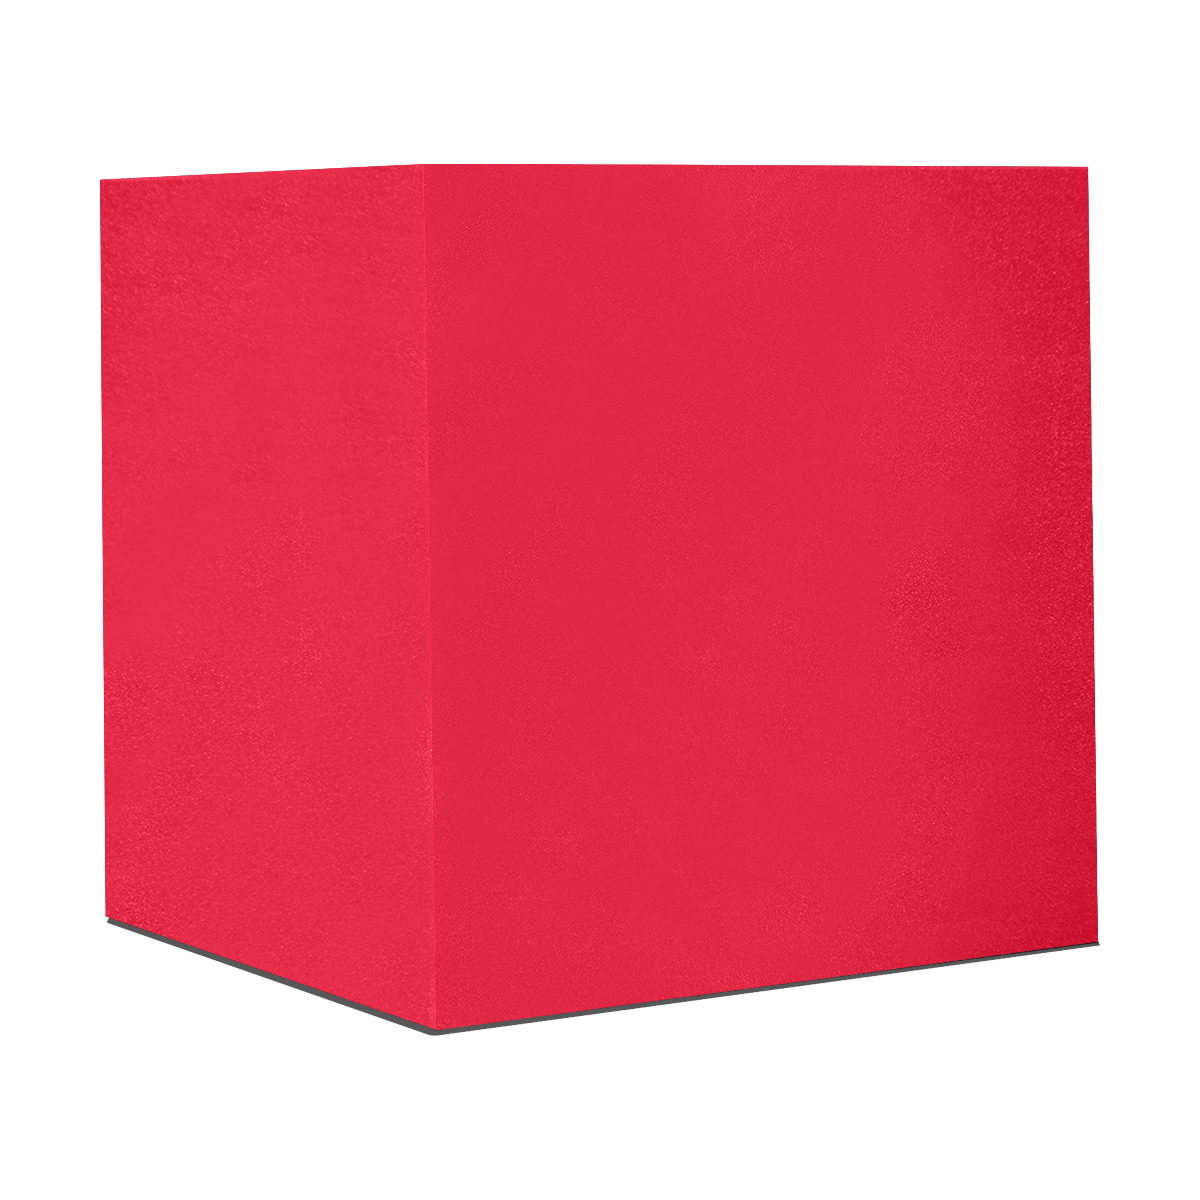 color Spanish red Gift Wrapping Paper 58"x 23" (1 Roll)